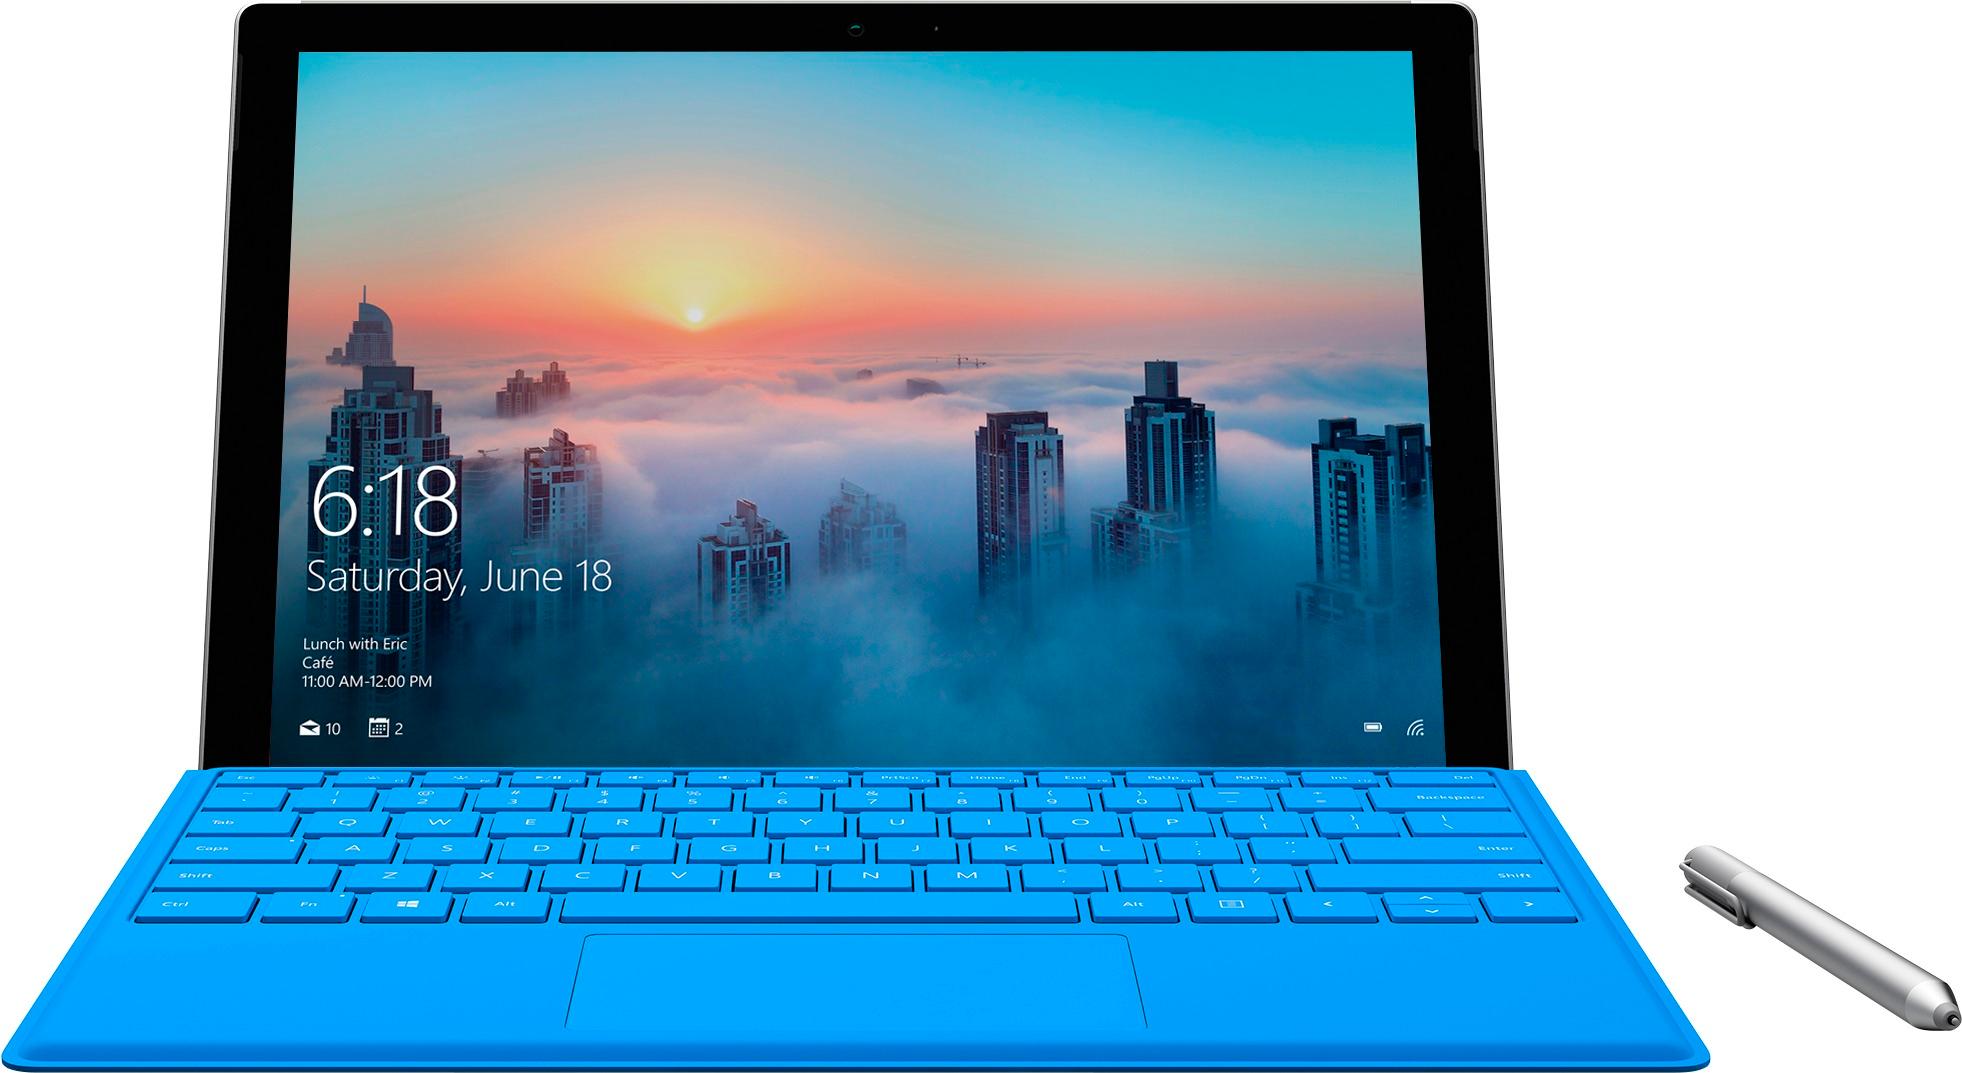 Microsoft Surface Pro 4 12.3 1TB Multi-Touch Tablet SU4-00001